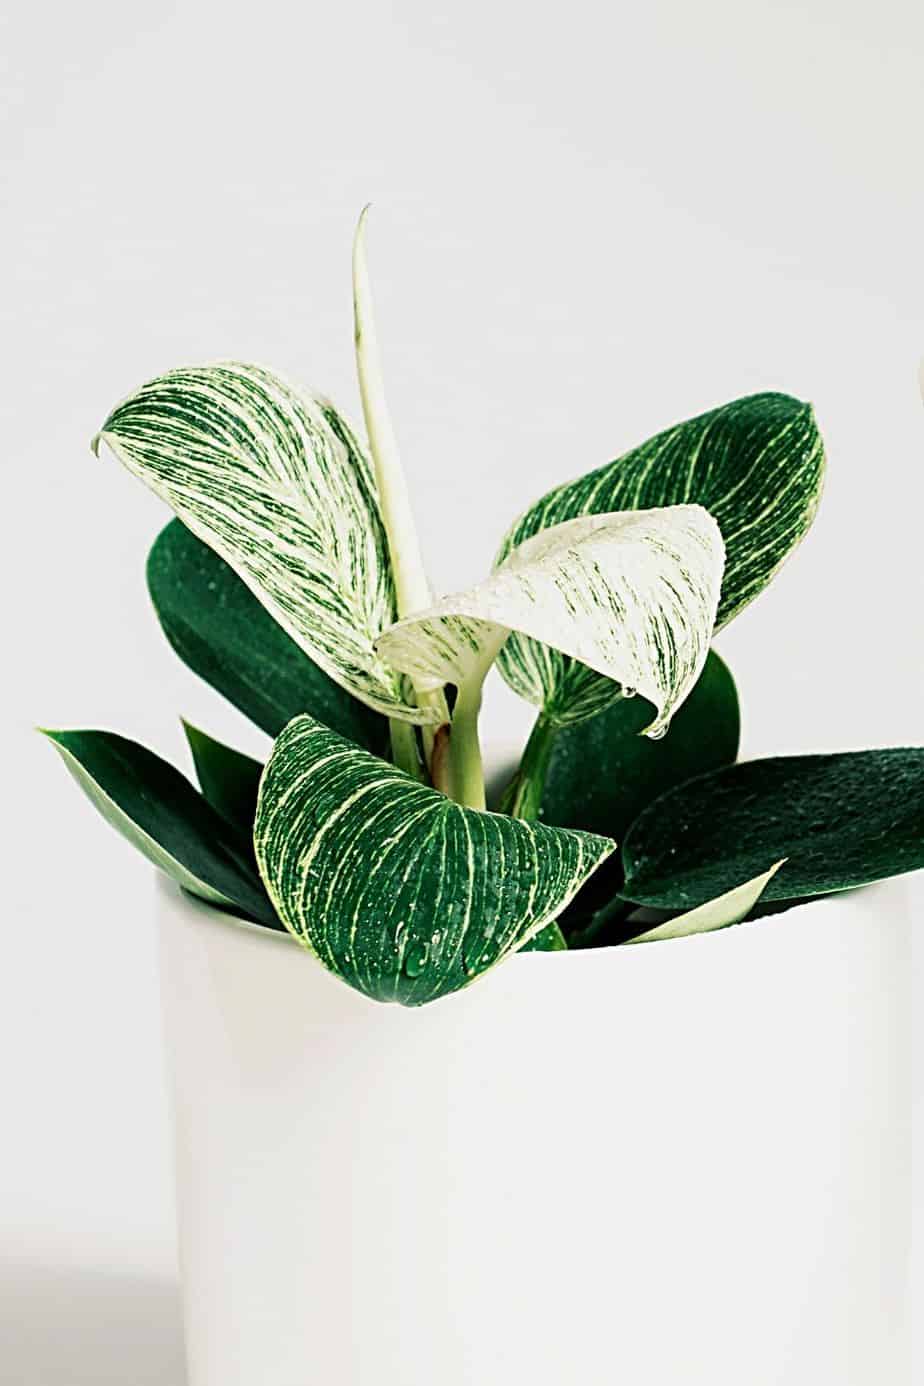 Avoid waterlogging your Philodendron Birkin so it won't lose its white variegation